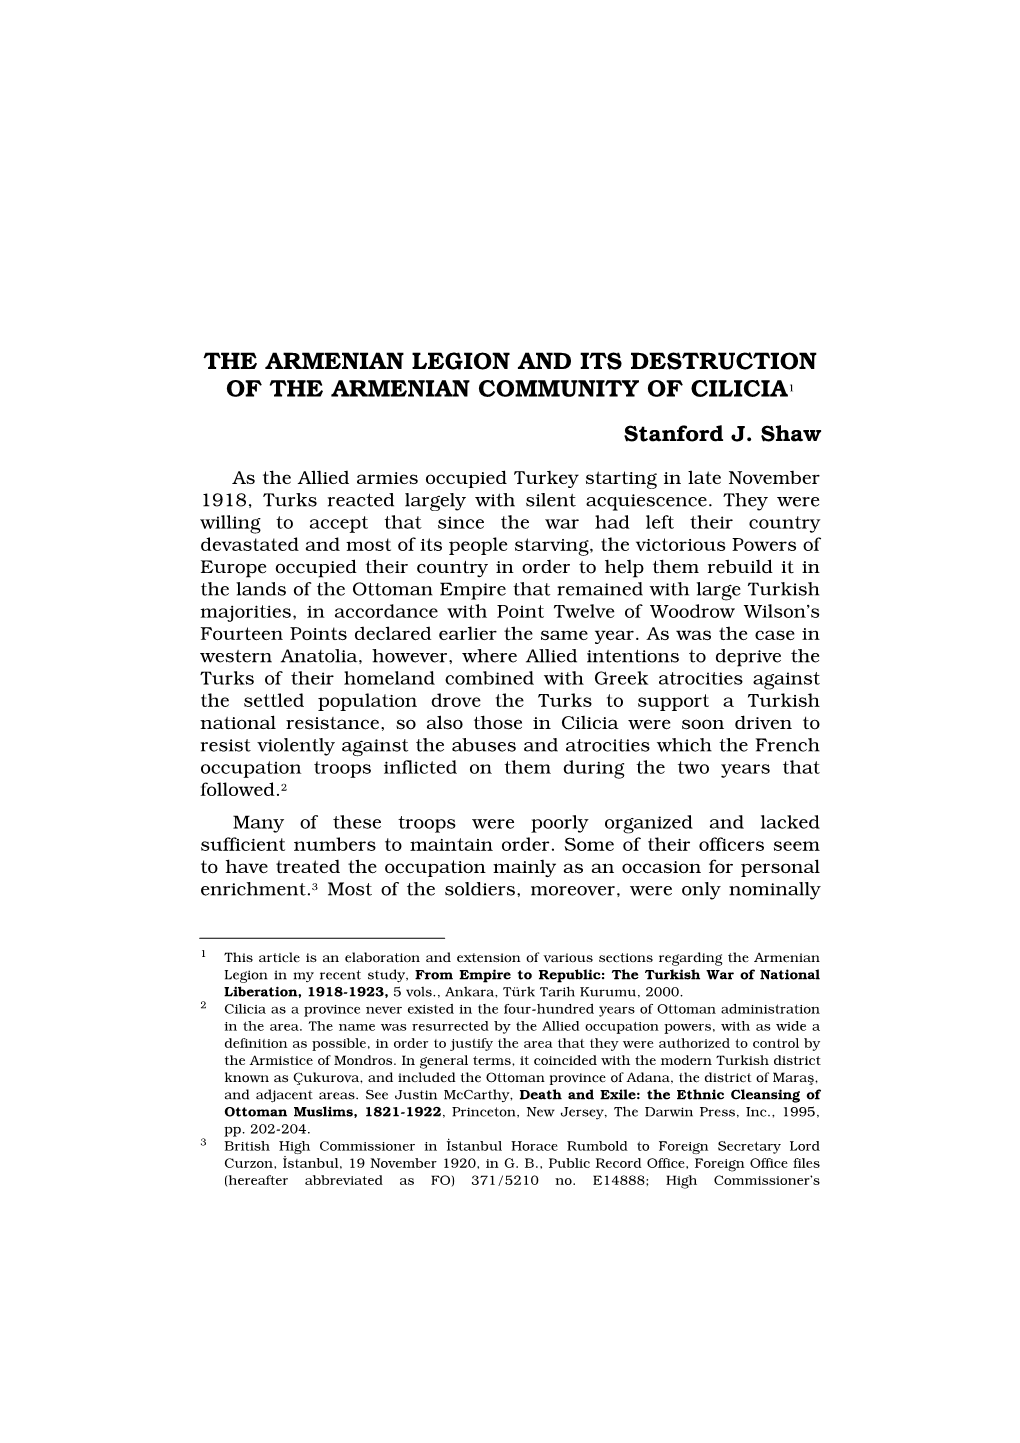 THE ARMENIAN LEGION and ITS DESTRUCTION of the ARMENIAN COMMUNITY of CILICIA1 Stanford J